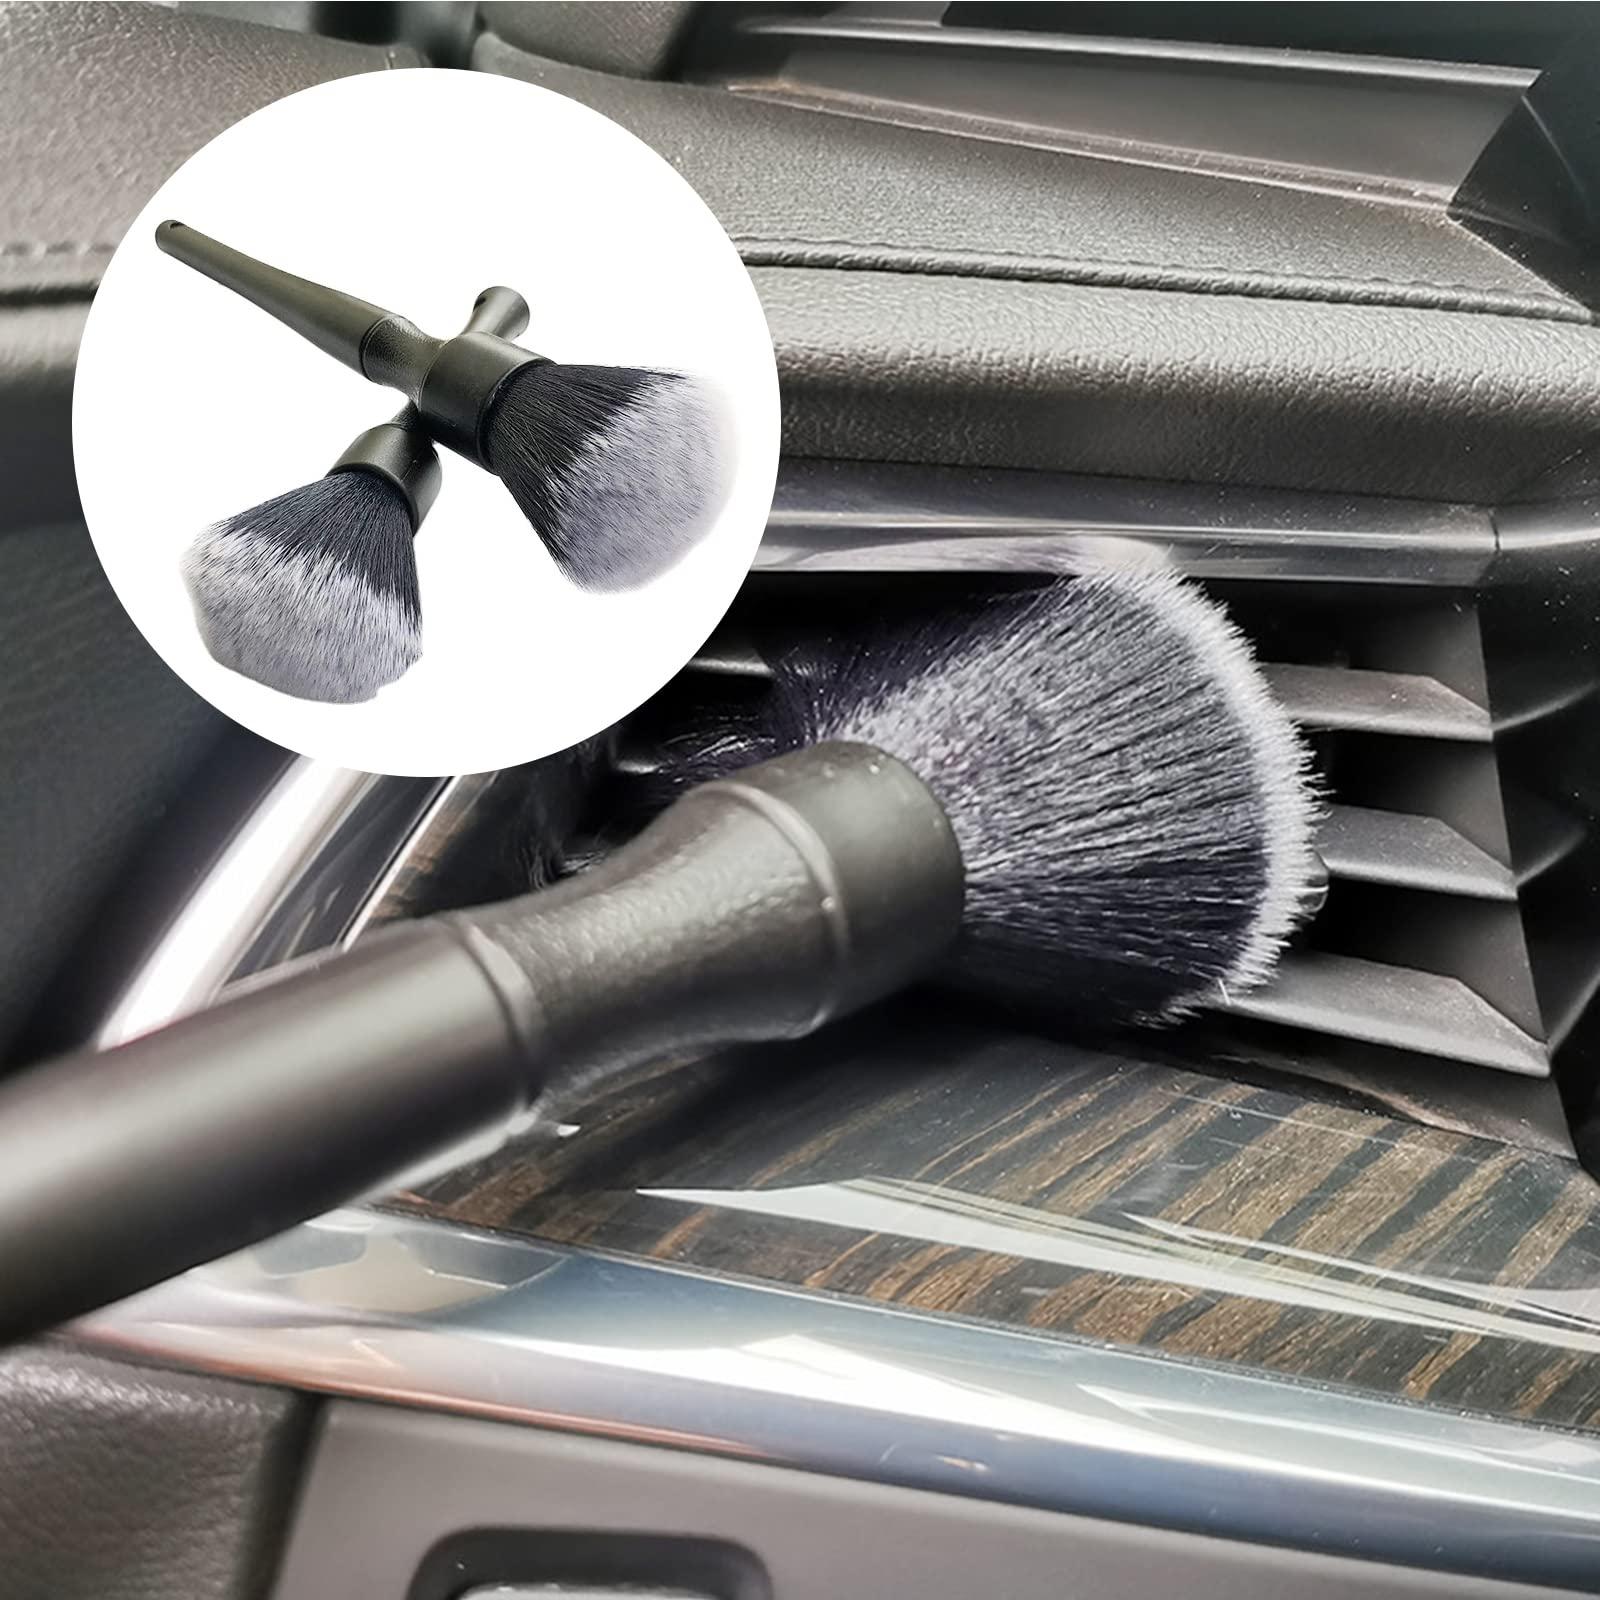 ALI2 Detailing Brush Set,Soft Comfortable Grip for Car Interior and Exterior Detailing Cleaning,Black 1